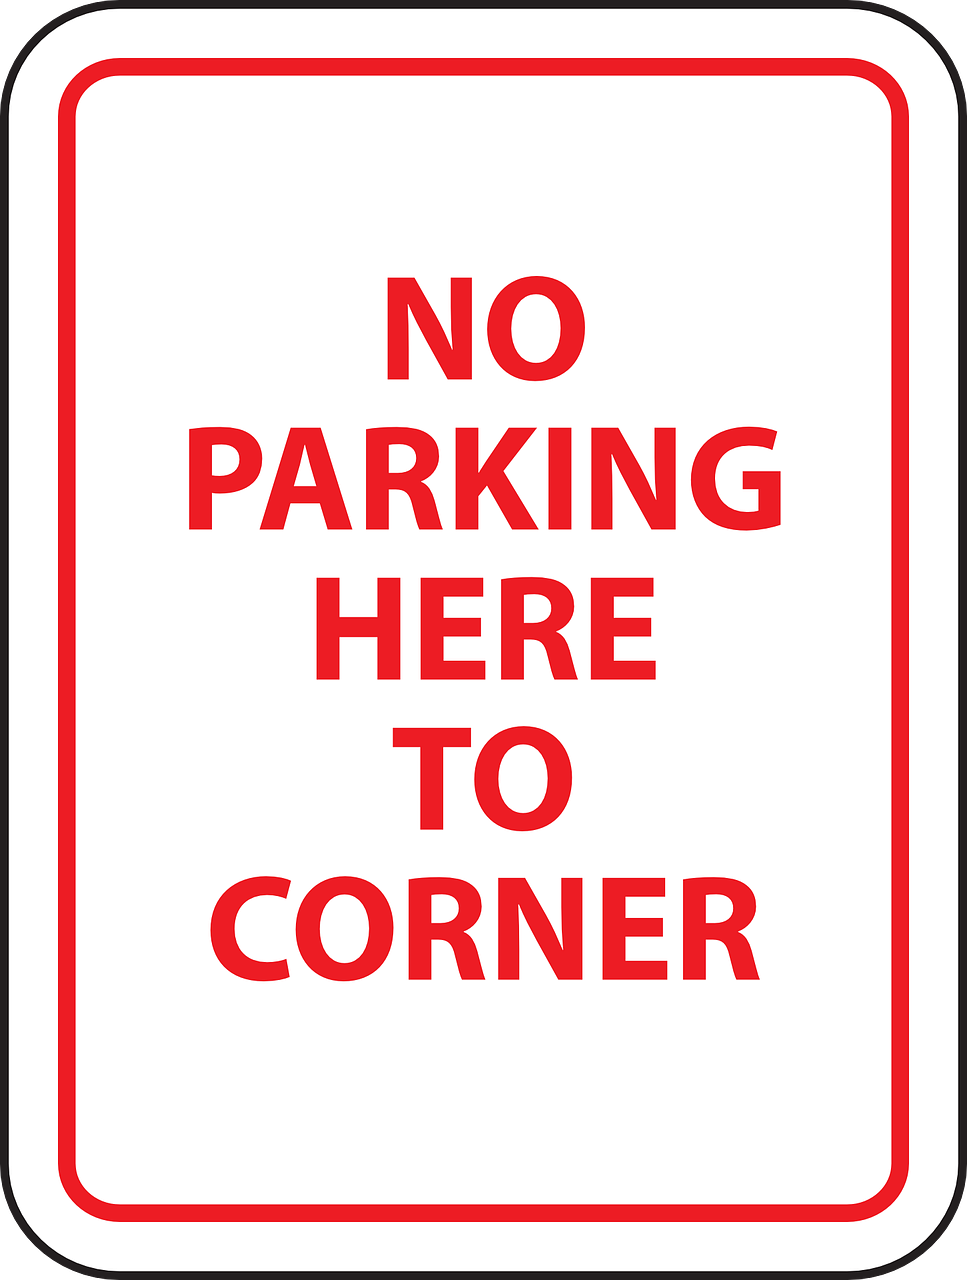 a red and white sign that says no parking here to corner, a portrait, h 7 6 8, full product shot, looking around a corner, 2 0